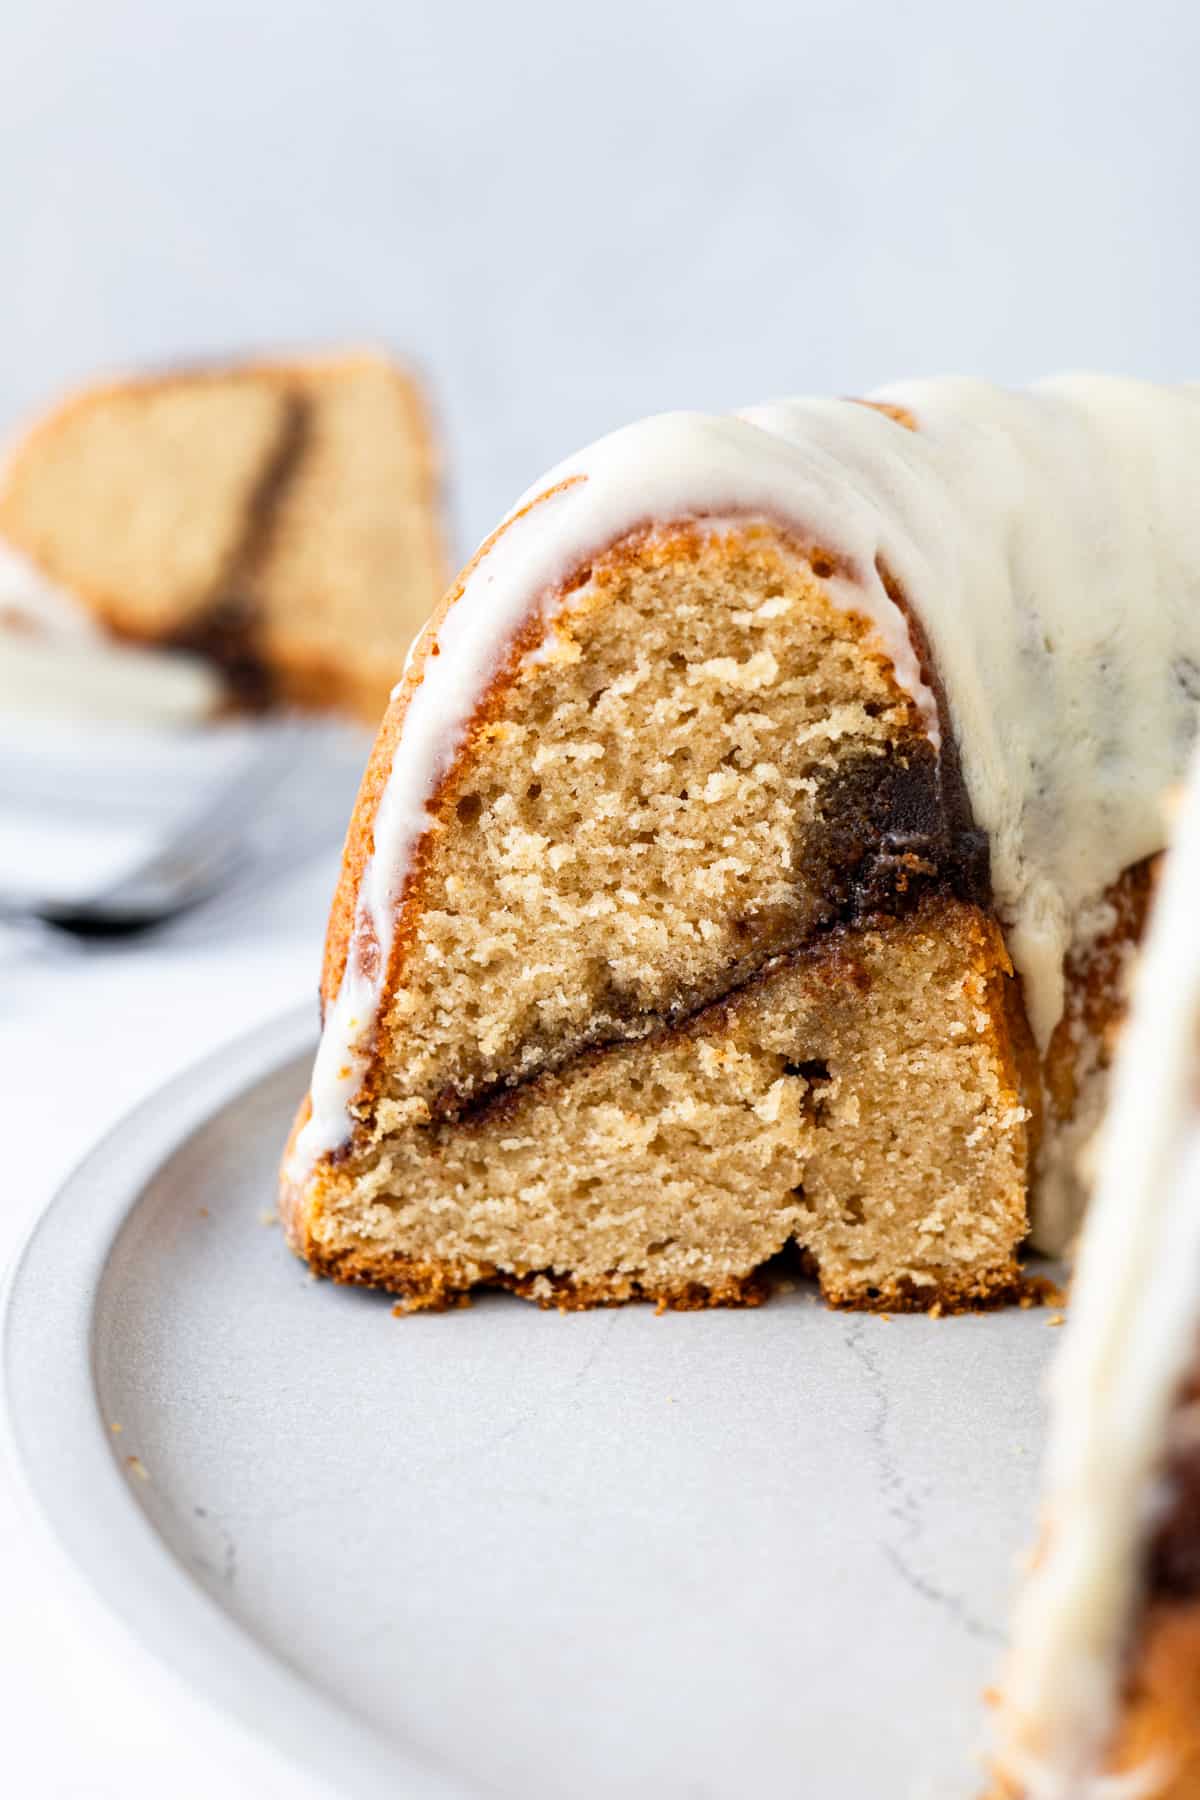 A cinnamon bundt cake that has been cut into.